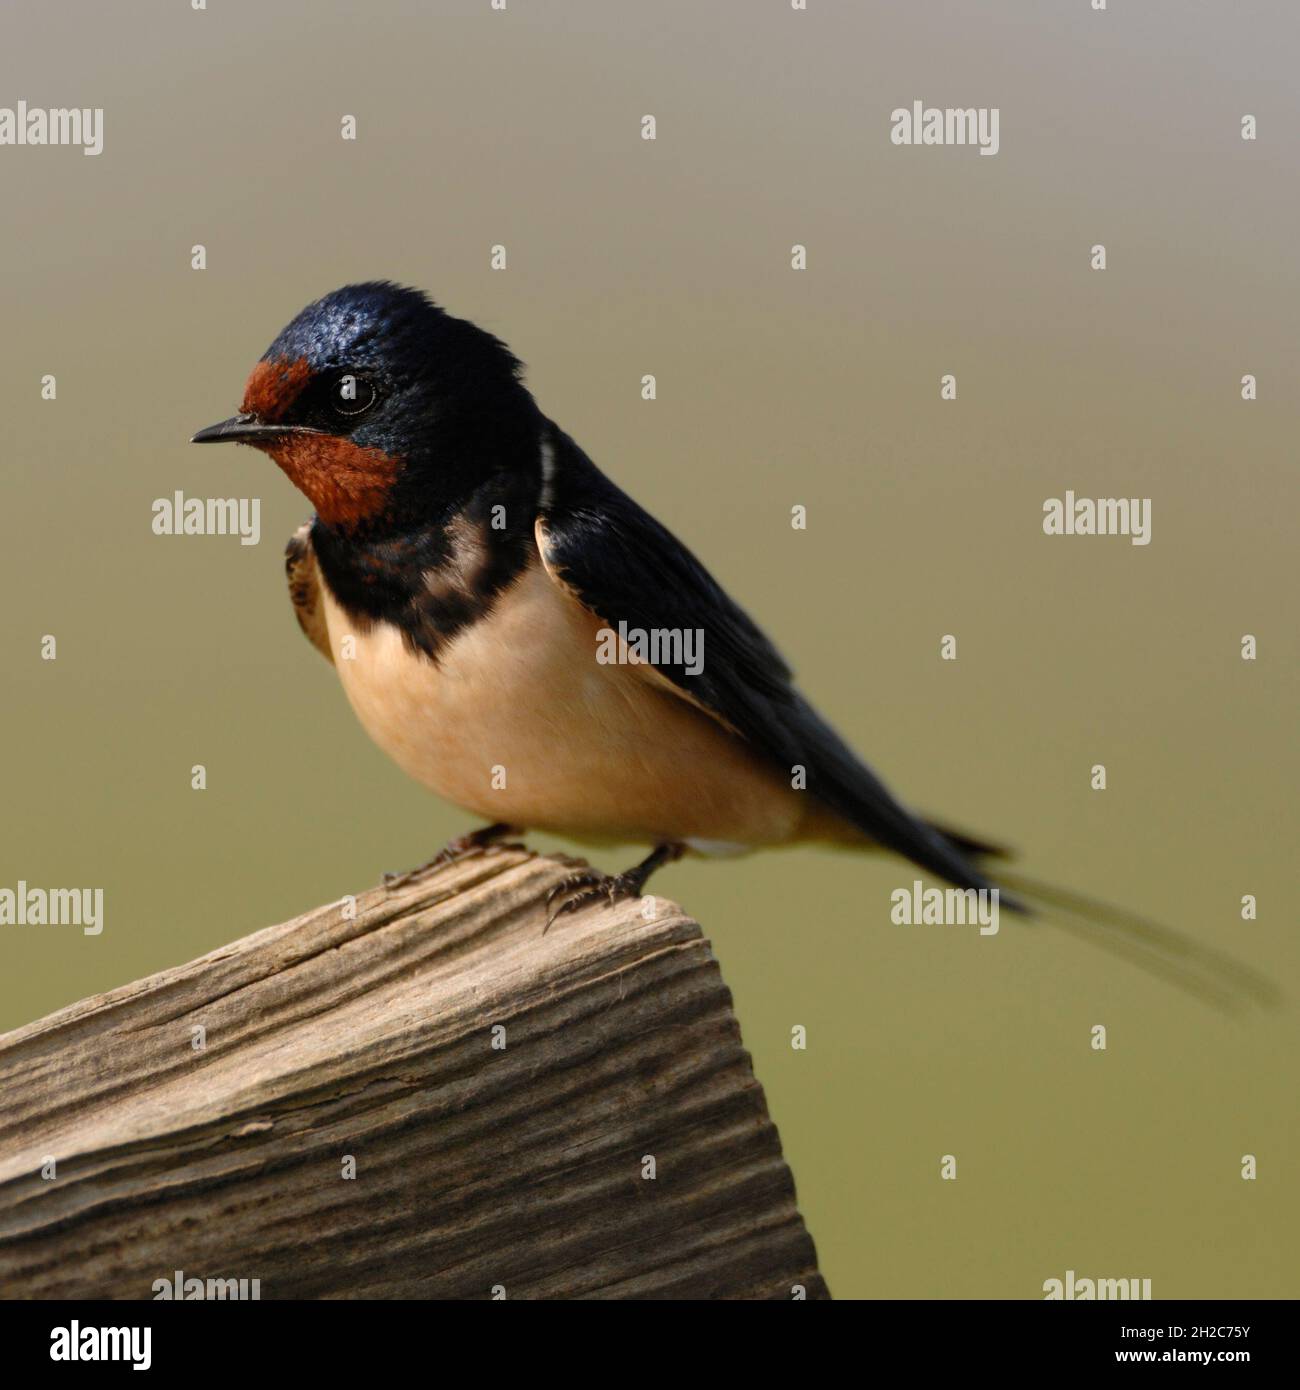 Barn Swallow ( Hirundo rustica ) perchedon a wooden fence in front of nice clean background, wildlife, Europe. Stock Photo